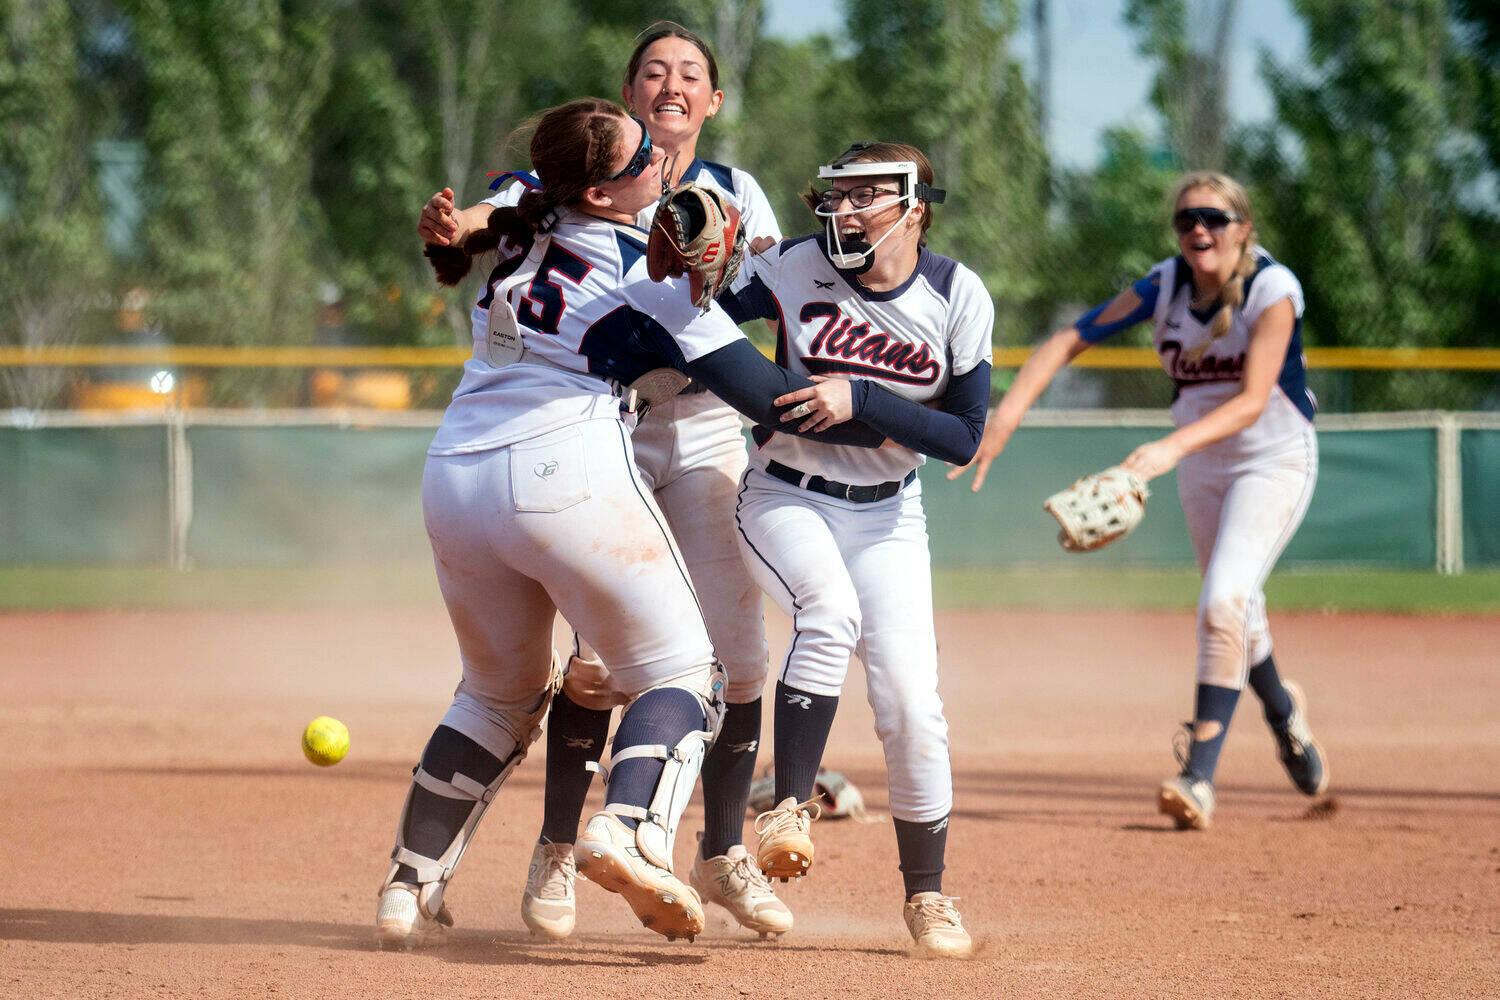 KODY CHRISTEN | THE CHRONICLE Pe Ell-Willapa Valley’s (from left) Sophia Milanowski, Rilyn Channell and Lauren Emery celebrate after winning the 2B State third-place game with a win over Kittitas on Saturday at the Gateway Sports Complex in Yakima.